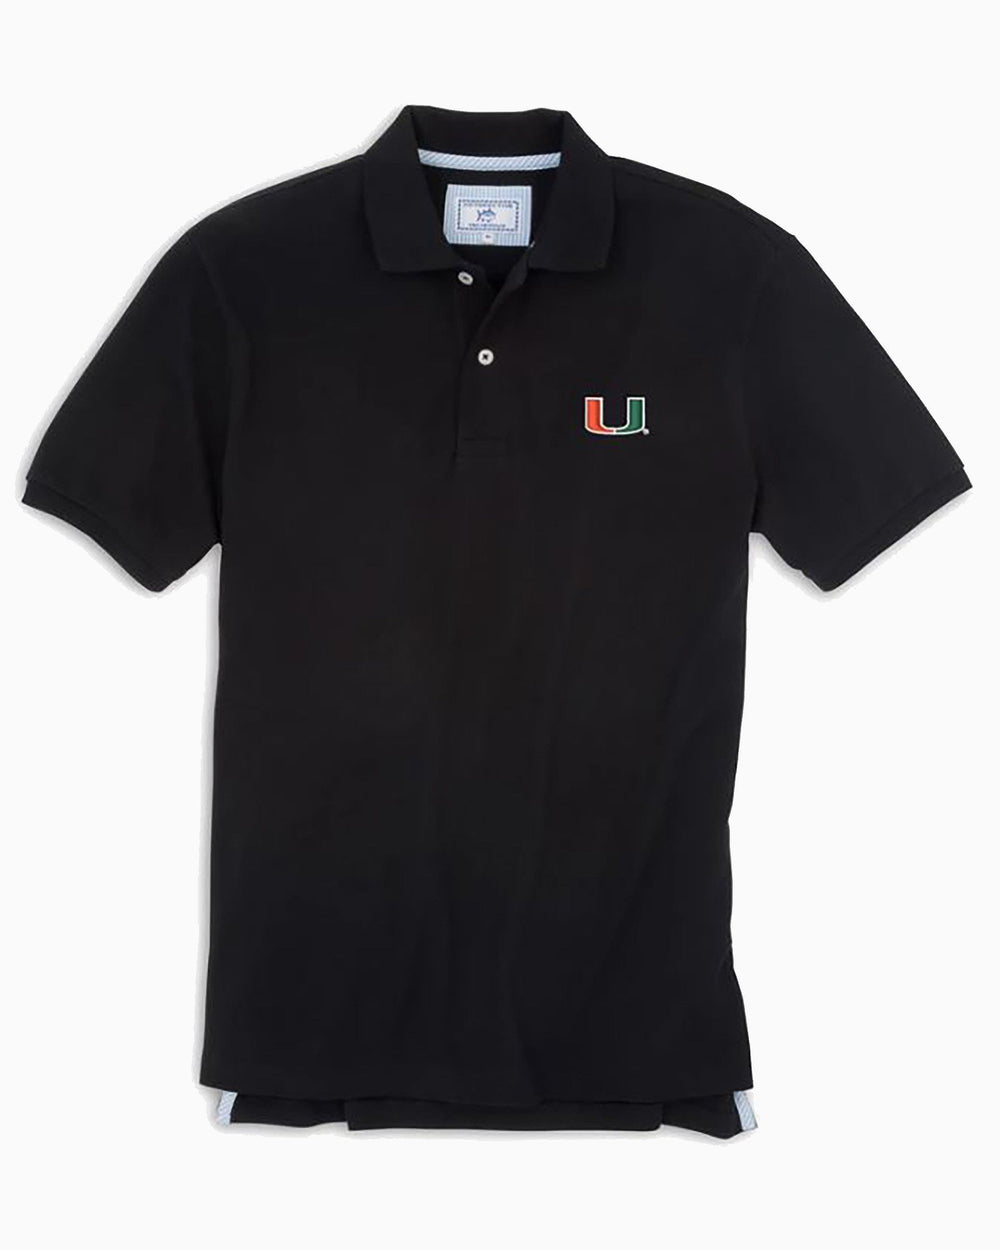 The front view of the Men's Black Miami Hurricanes Pique Polo Shirt by Southern Tide - Black